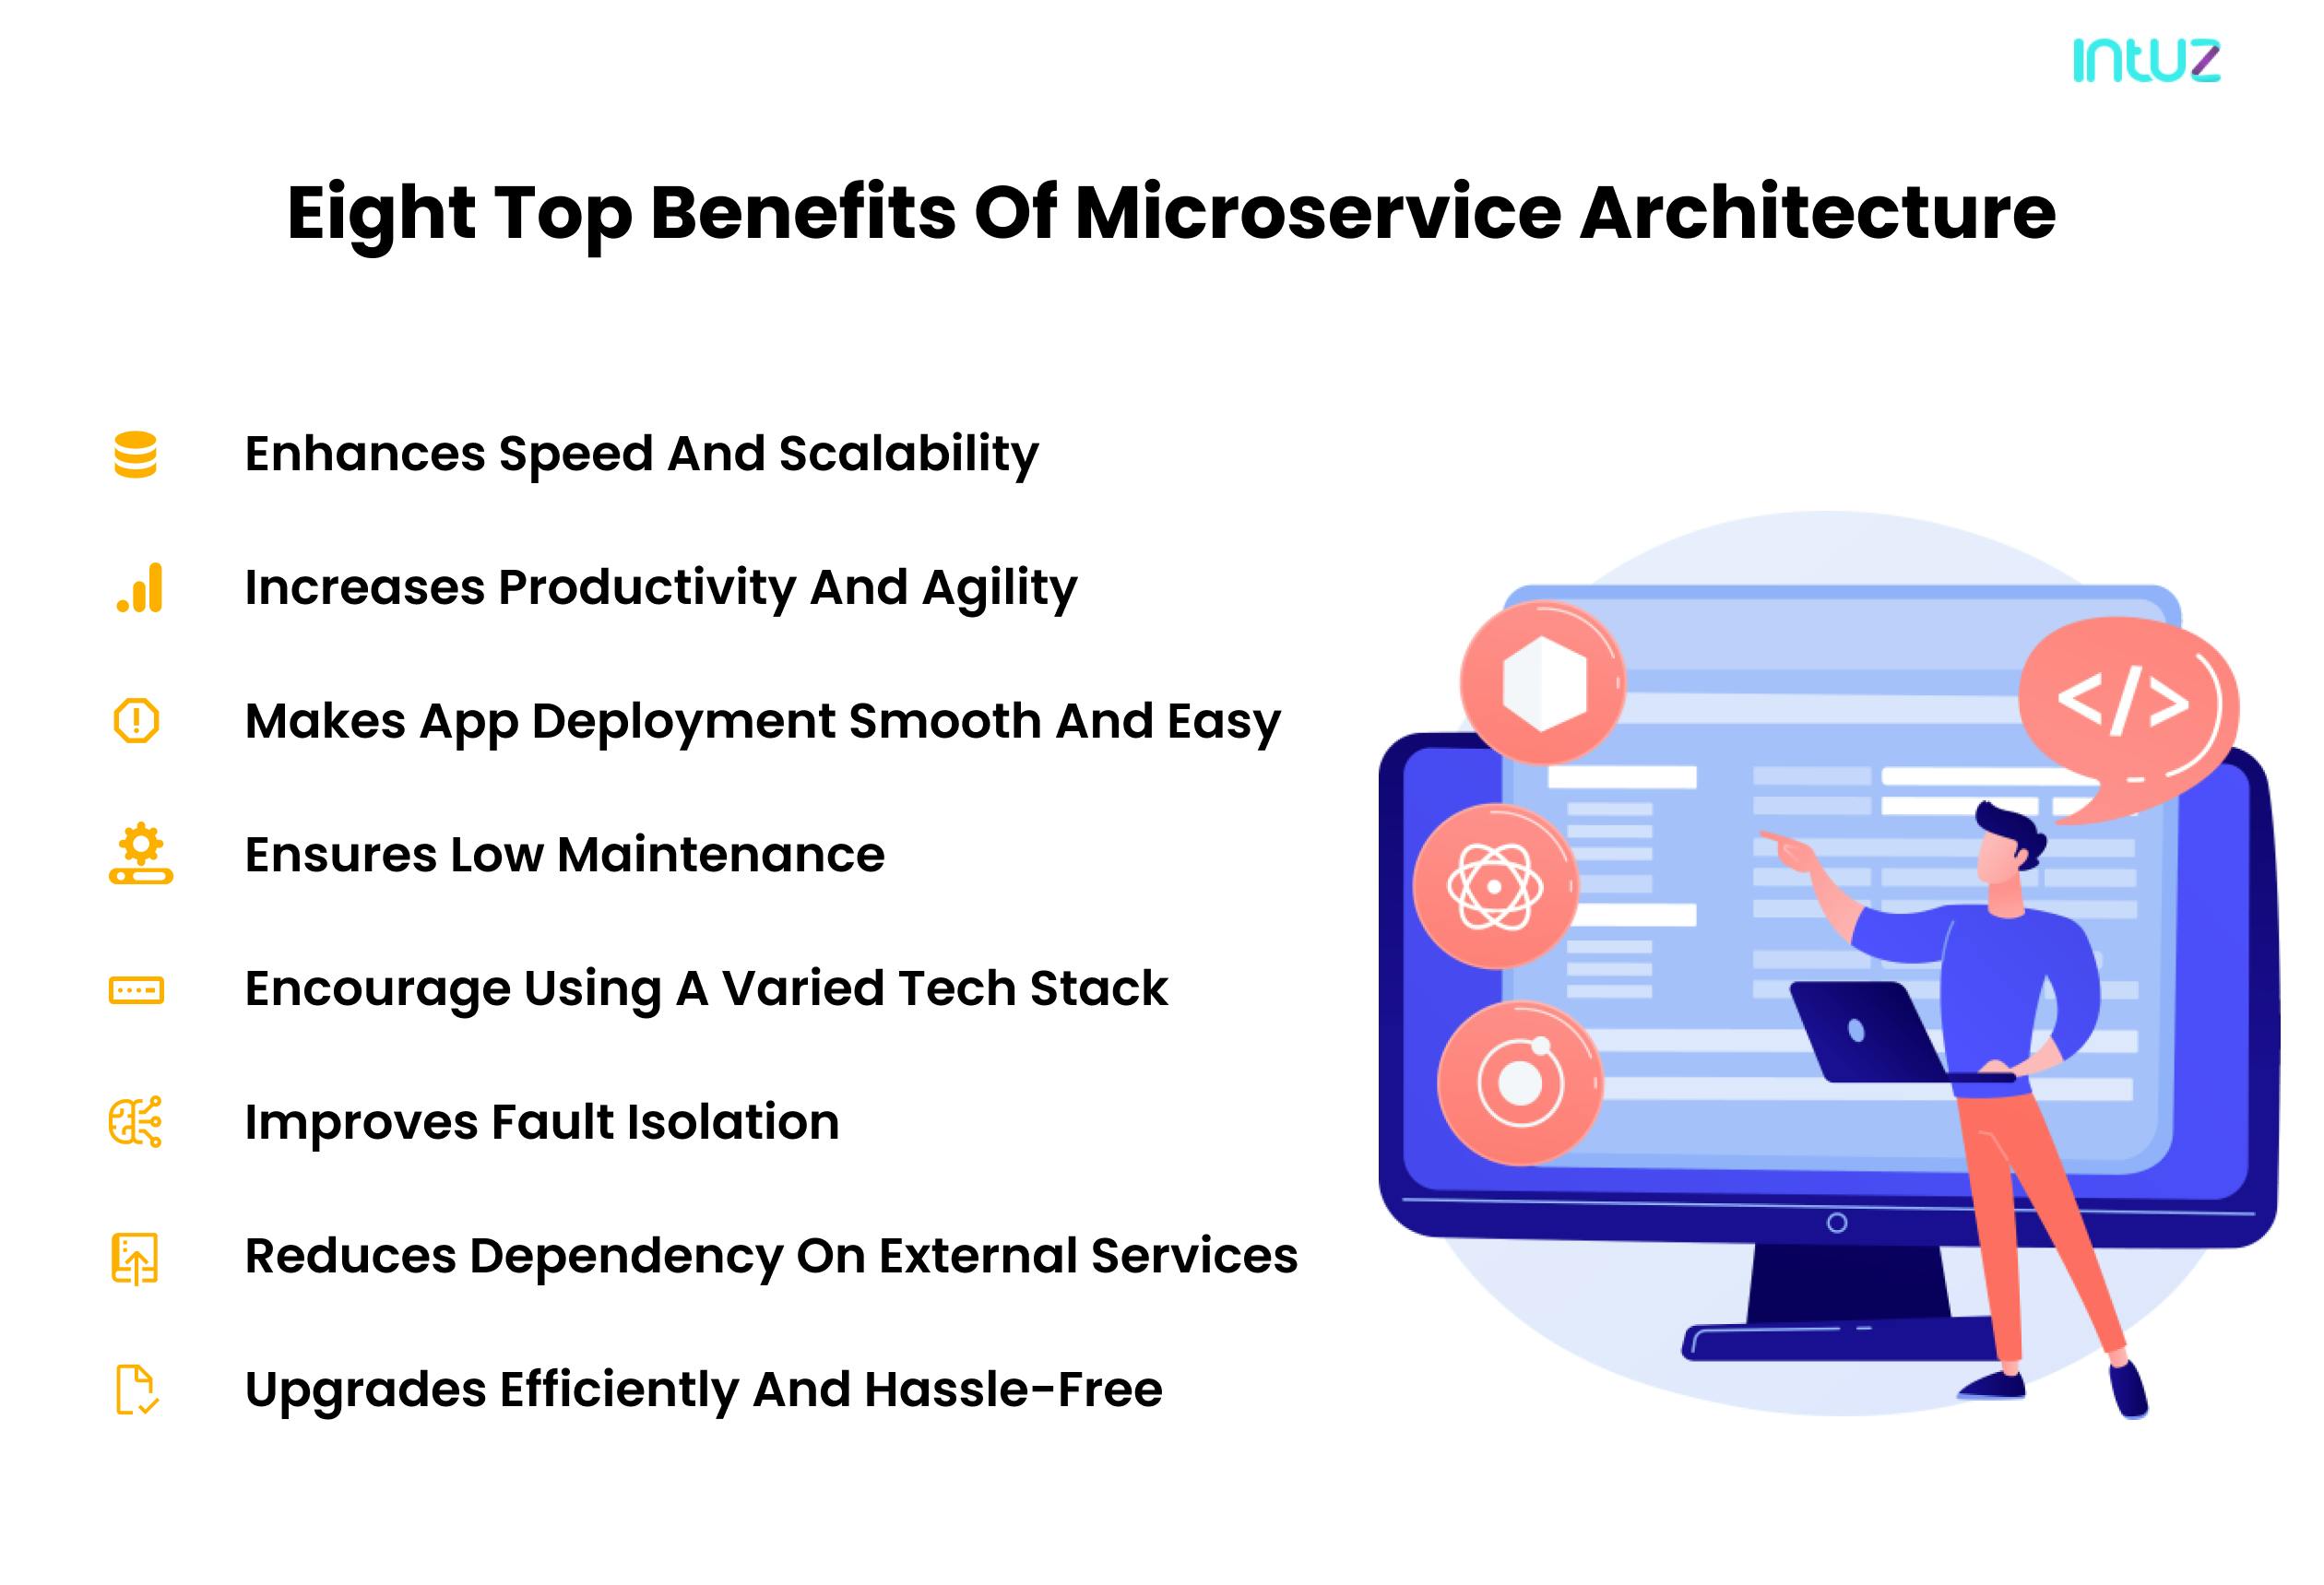 Why Microservices is the best option to go for Mobile Games?